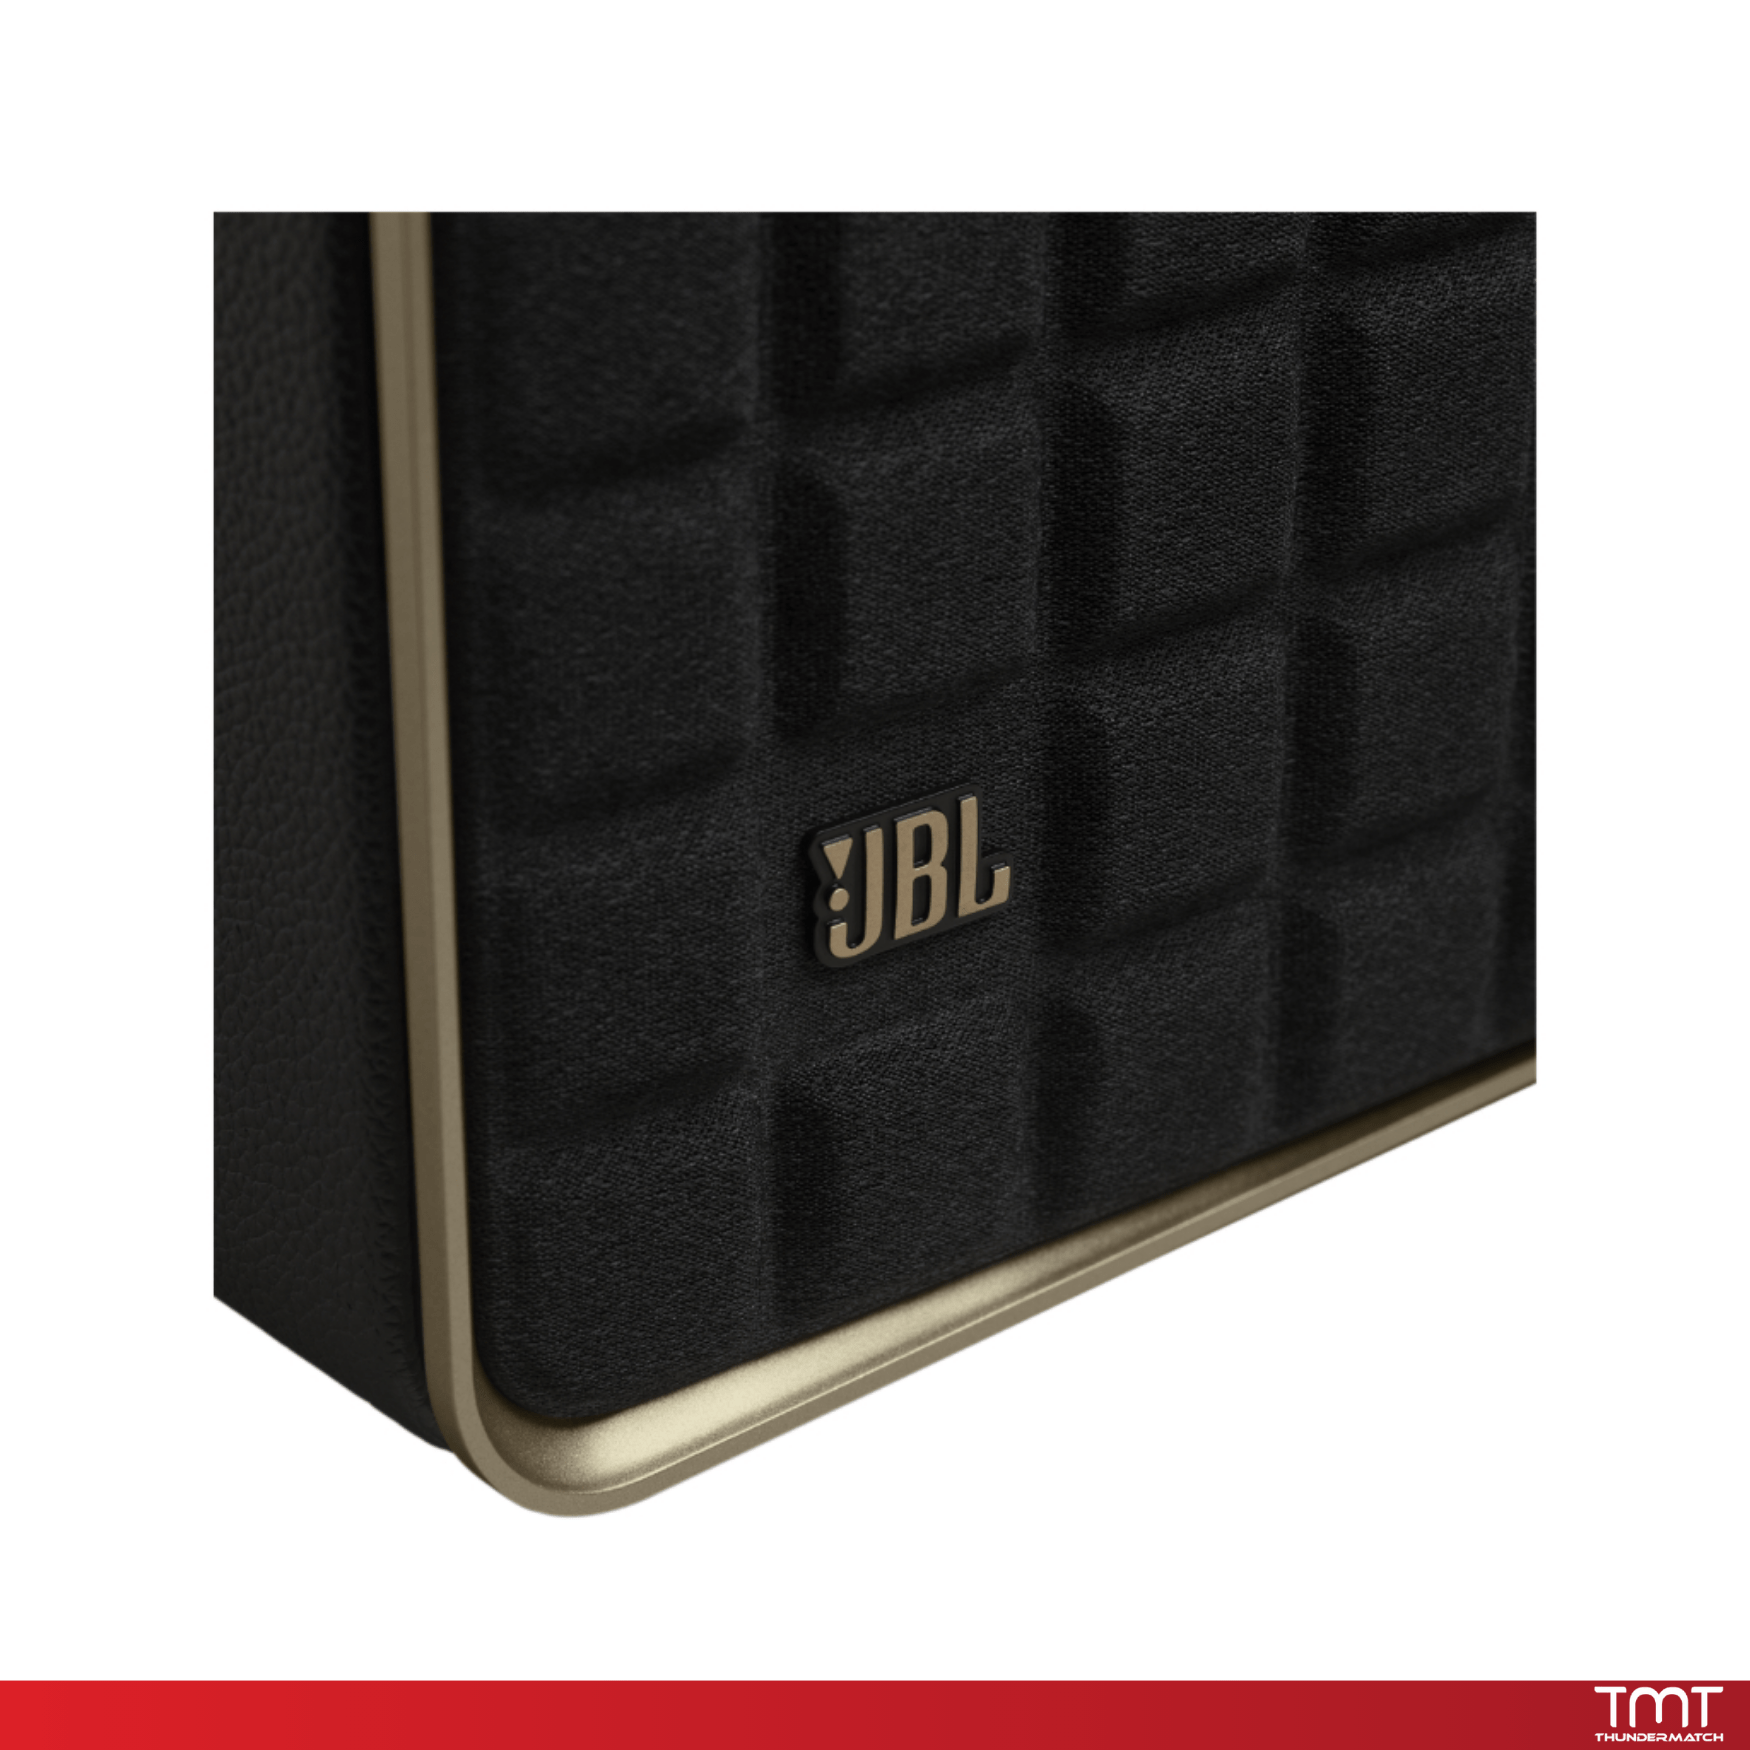 JBL AUTHENTICS 500 Hi-fidelity smart home speaker with Wi-Fi, Bluetooth and Voice Assistants with retro design.